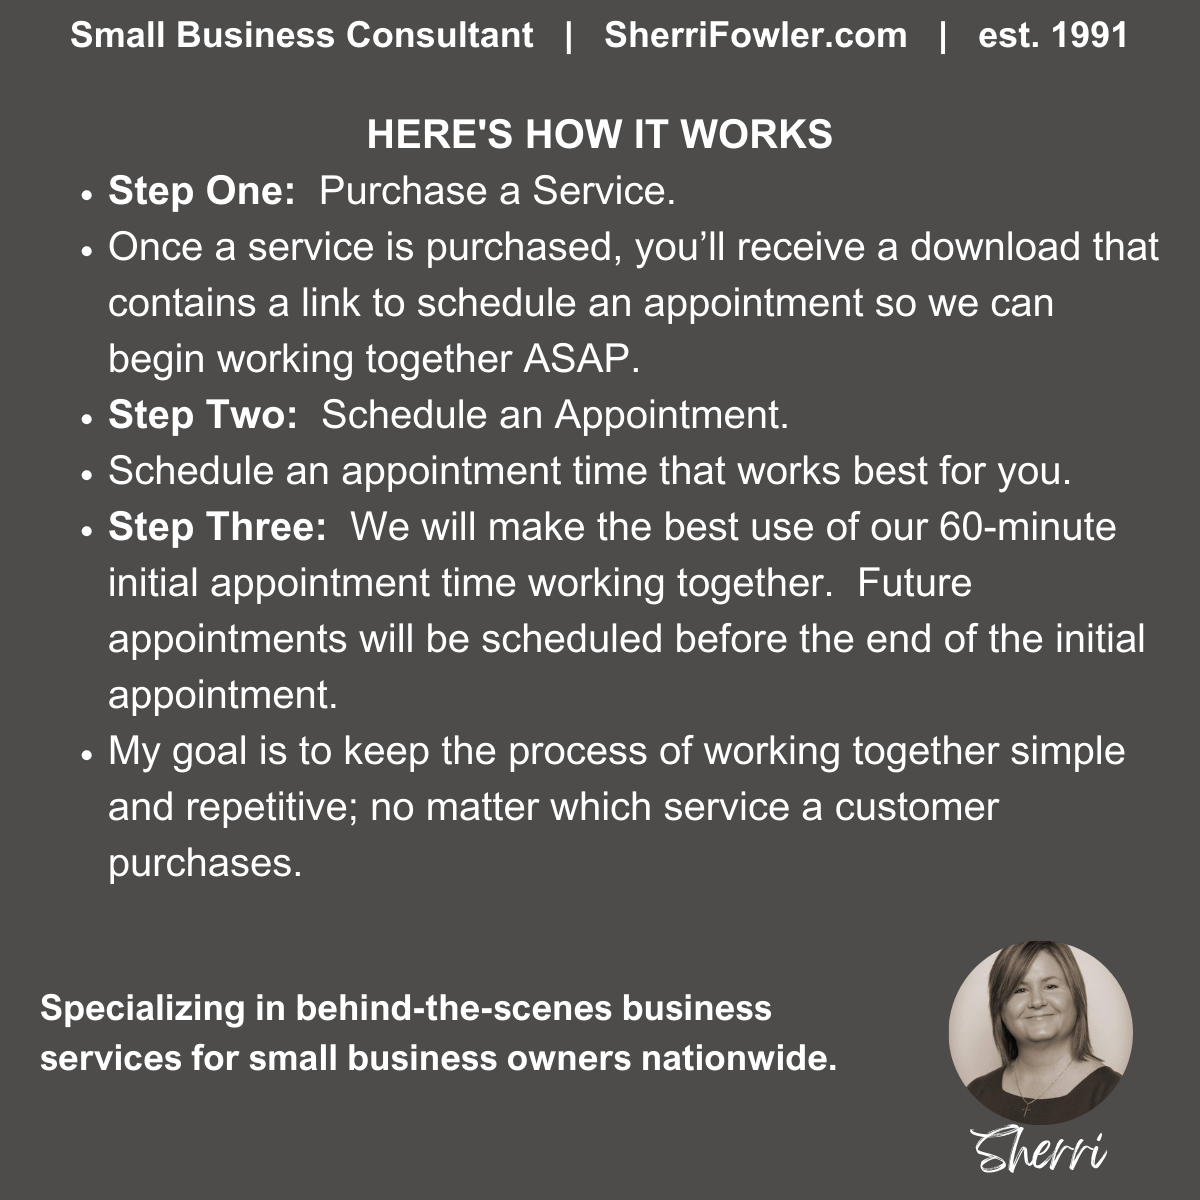 Postcard Design, Creation, Content or Copywriting Service for small business owners and nonprofits available at SherriFowler.com